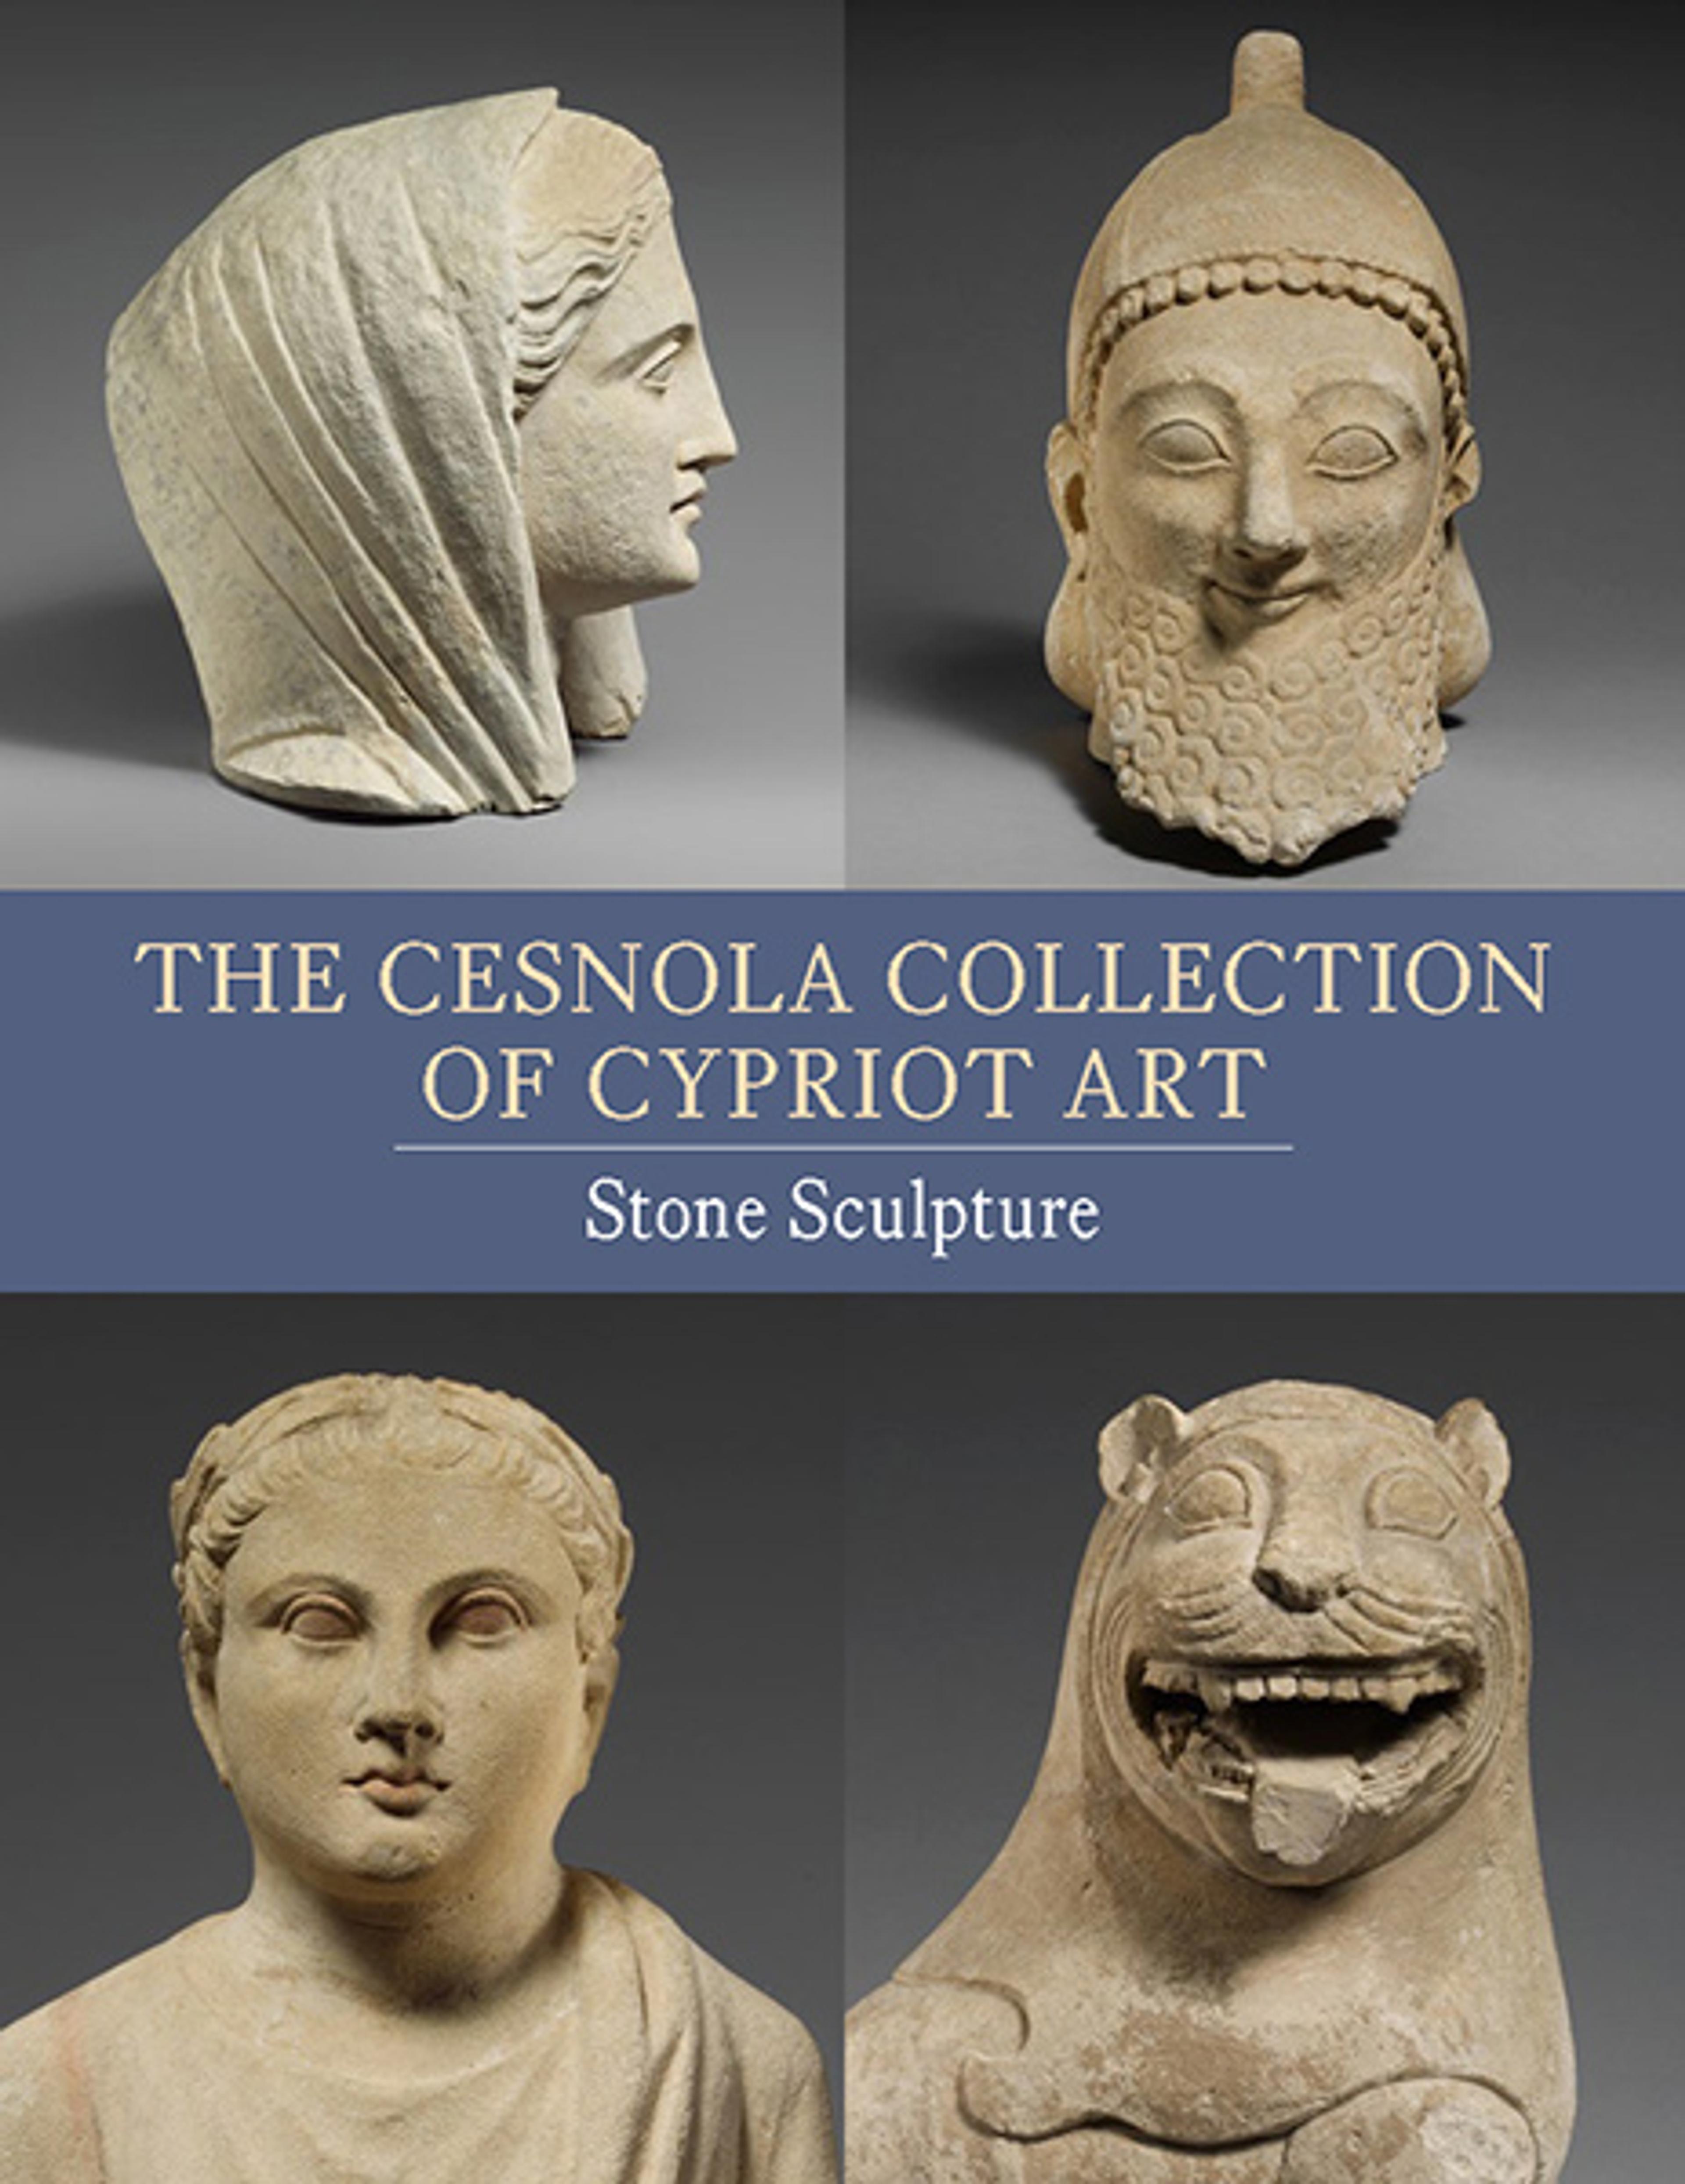 Cover of the Cesnola Collection catalogue